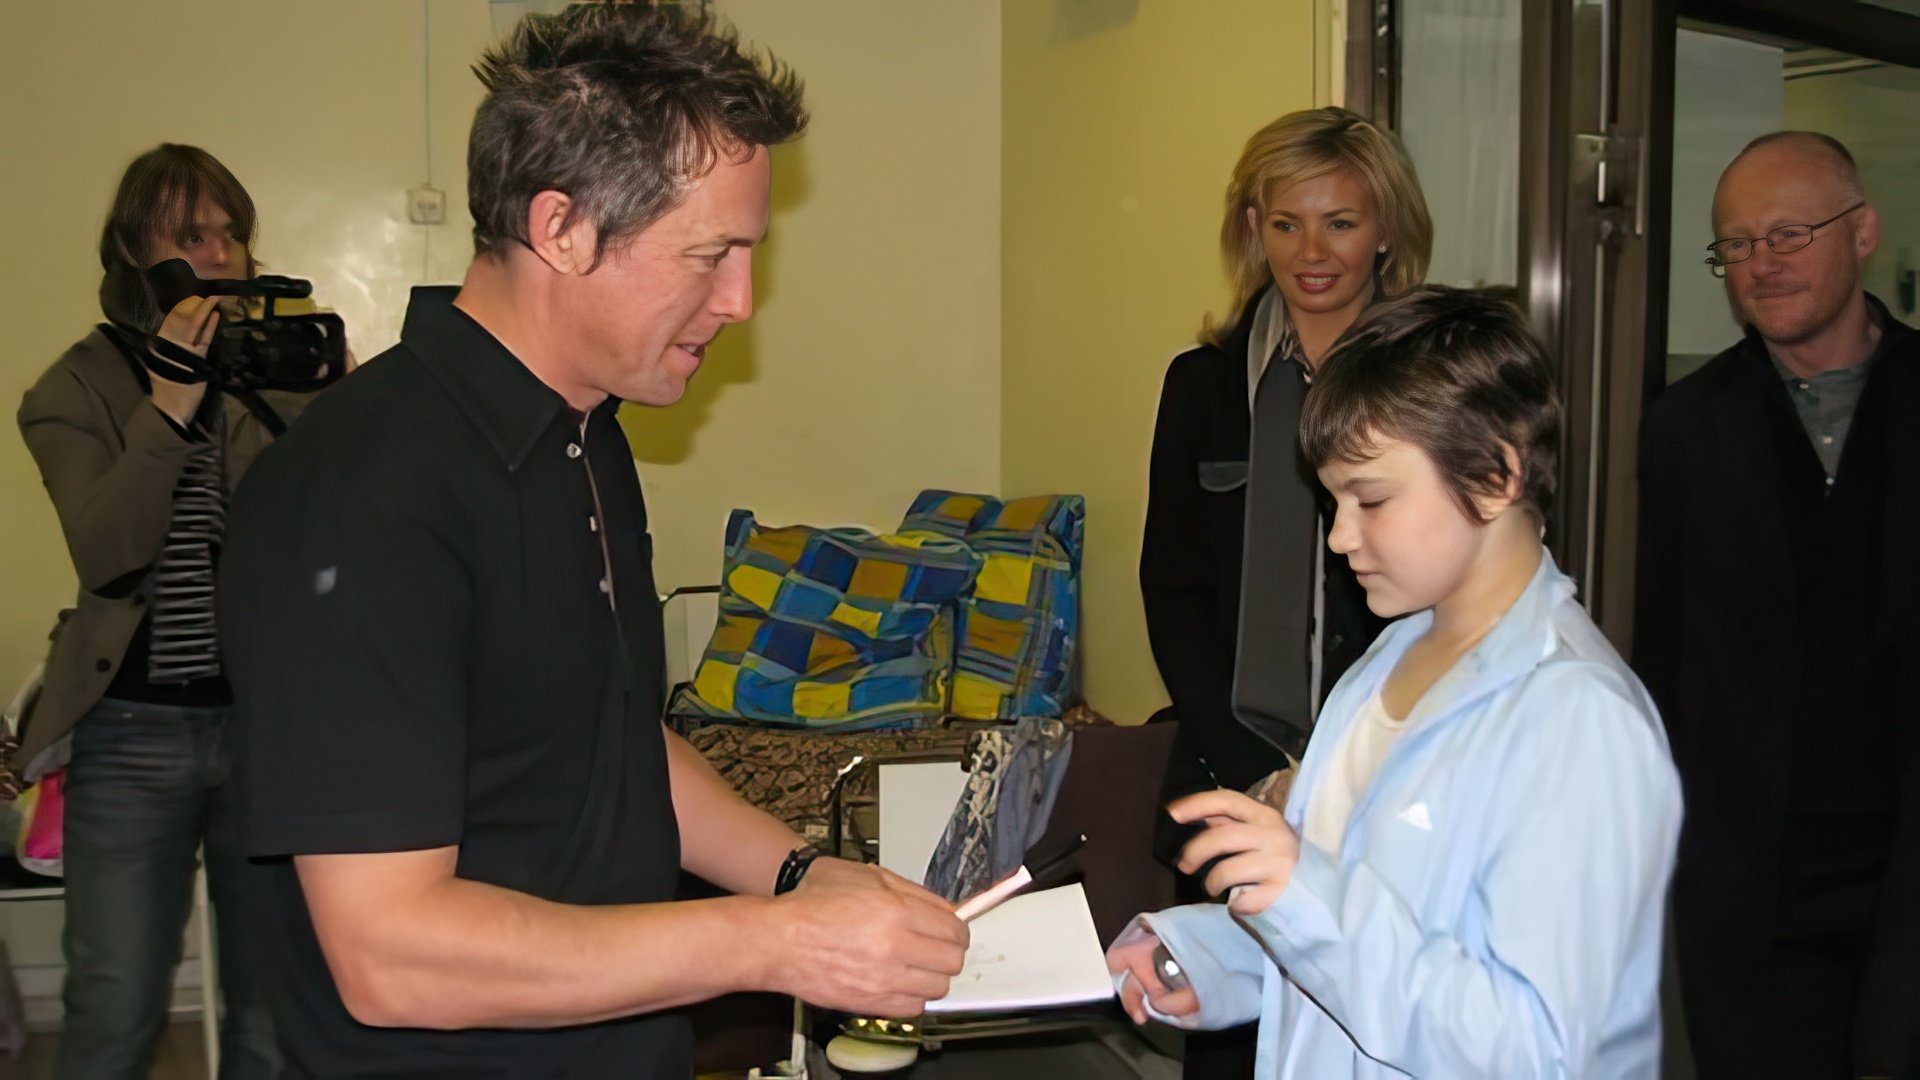 Hugh Grant at the Moscow Cancer Center